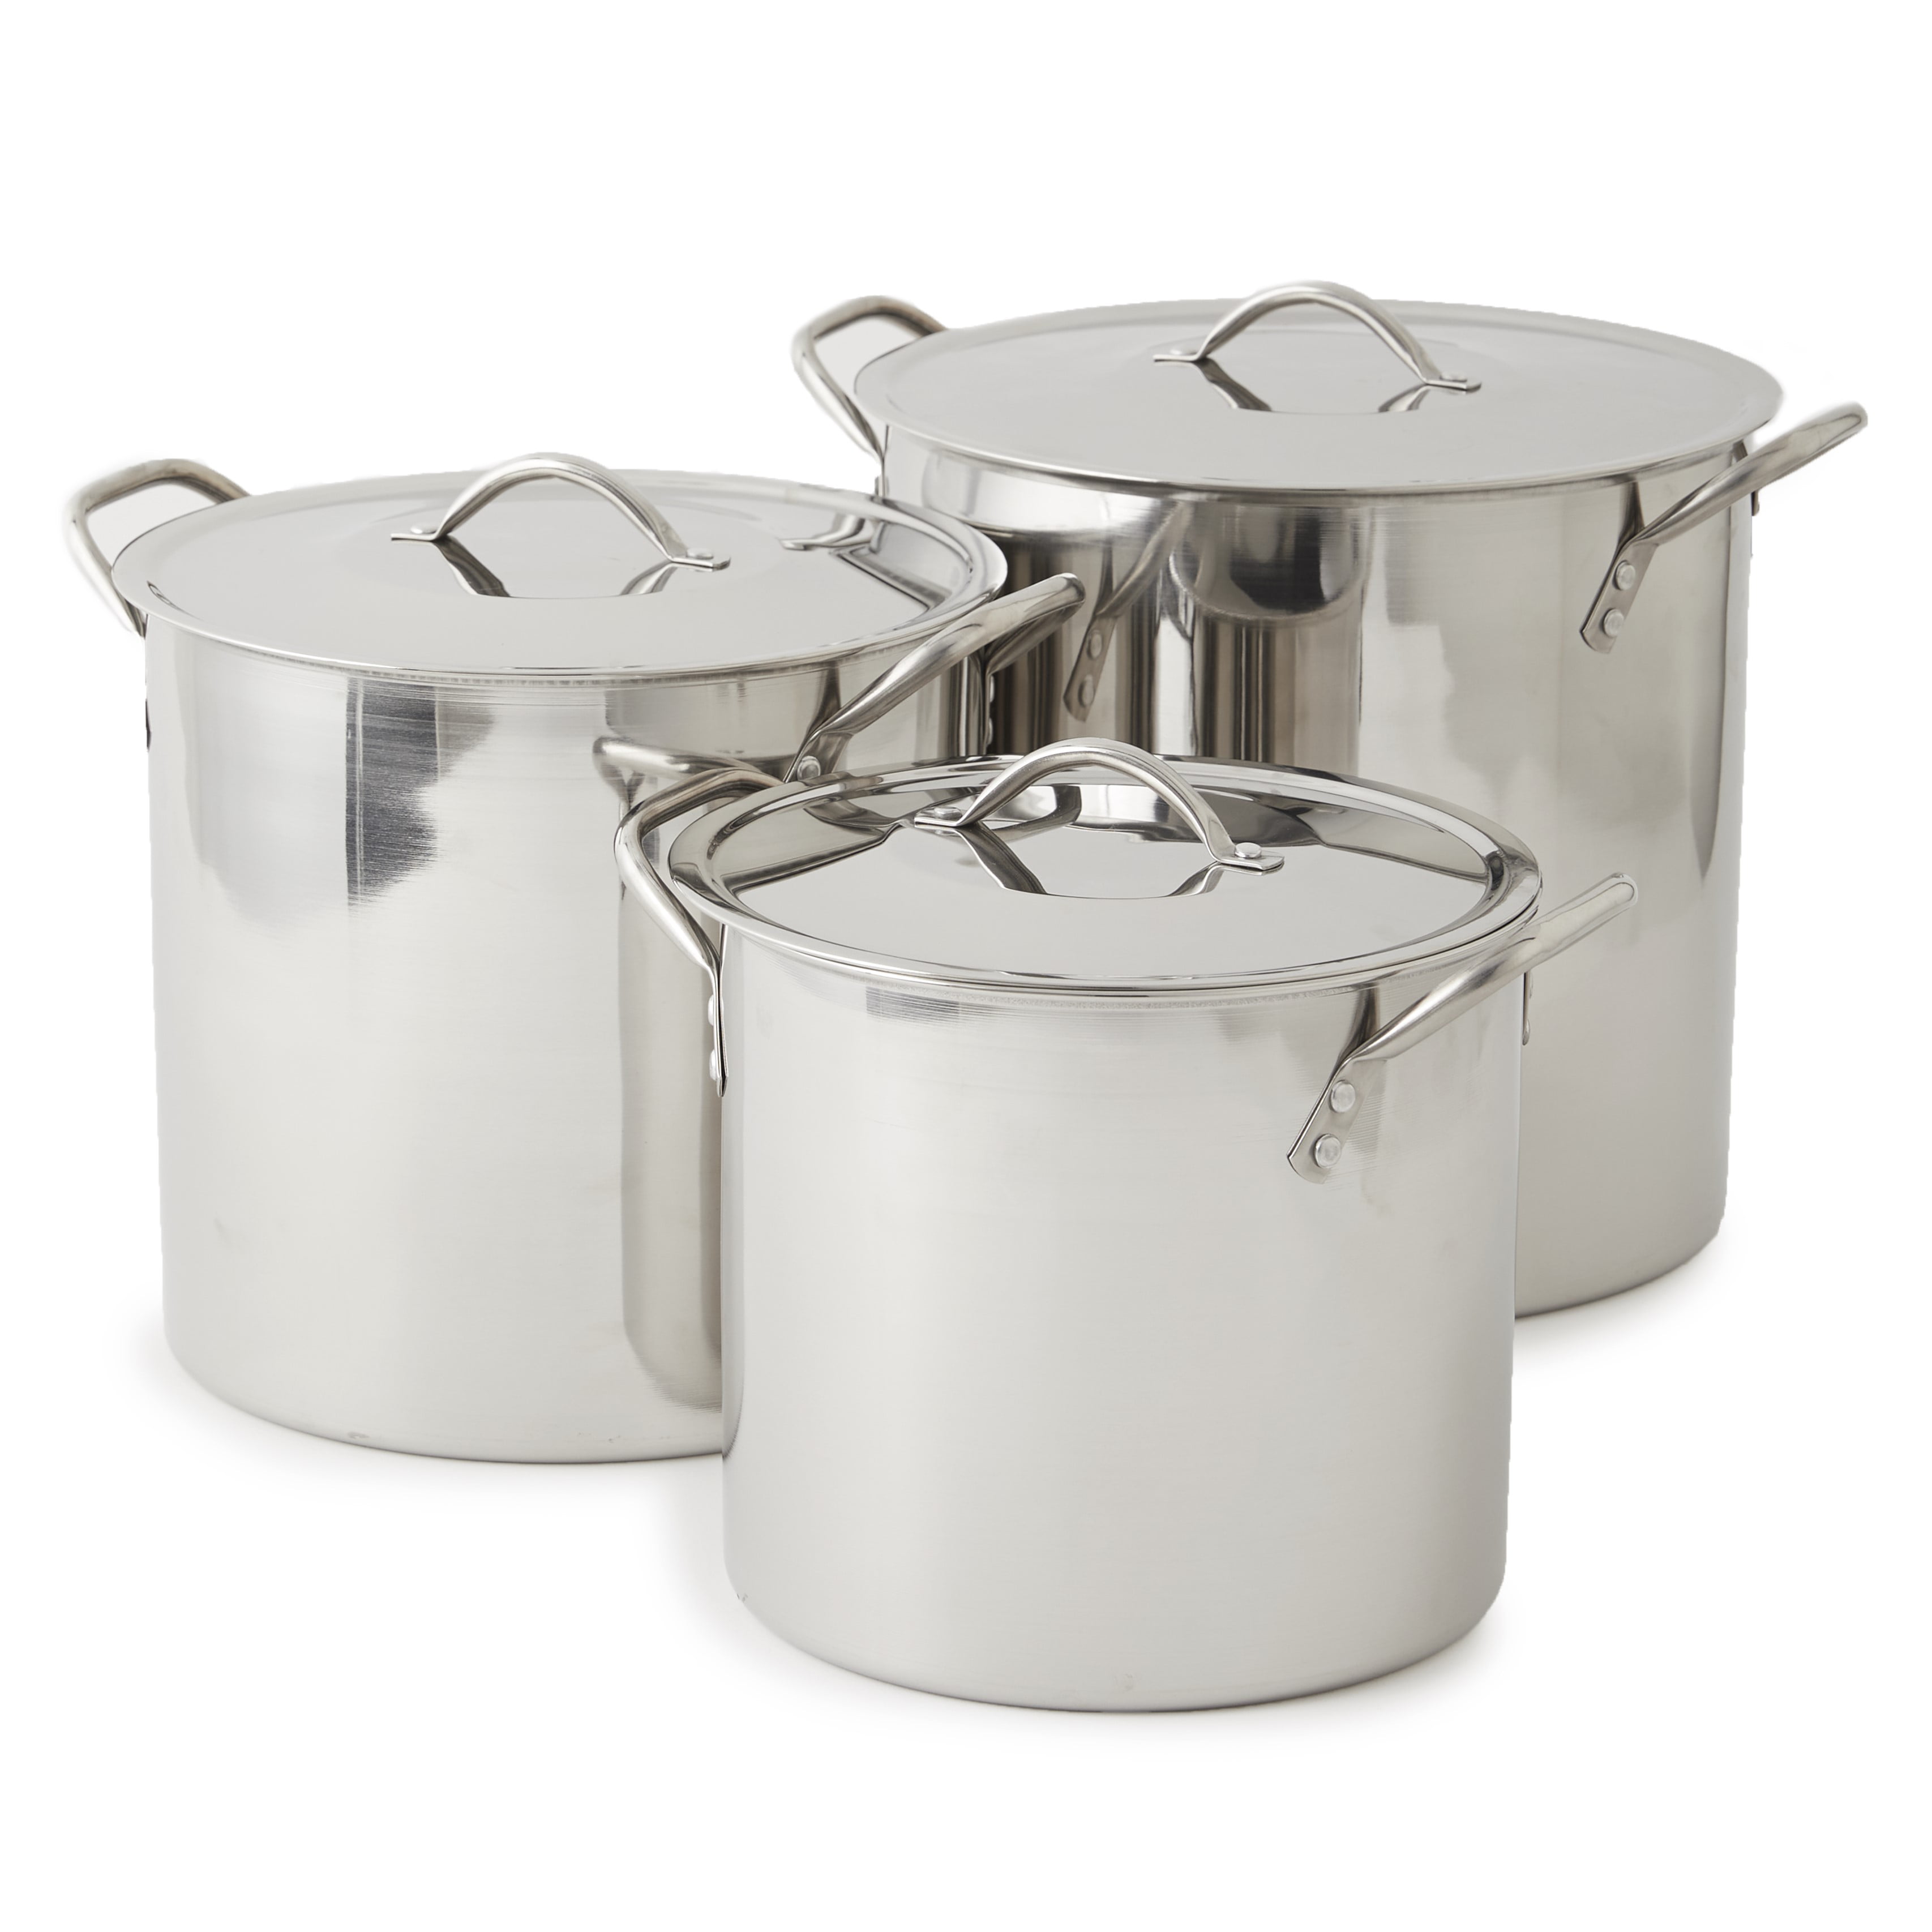 Mainstays Stainless Steel 8 Quart Stock Pot With Lid Cooking Soup Pasta Stew for sale online 